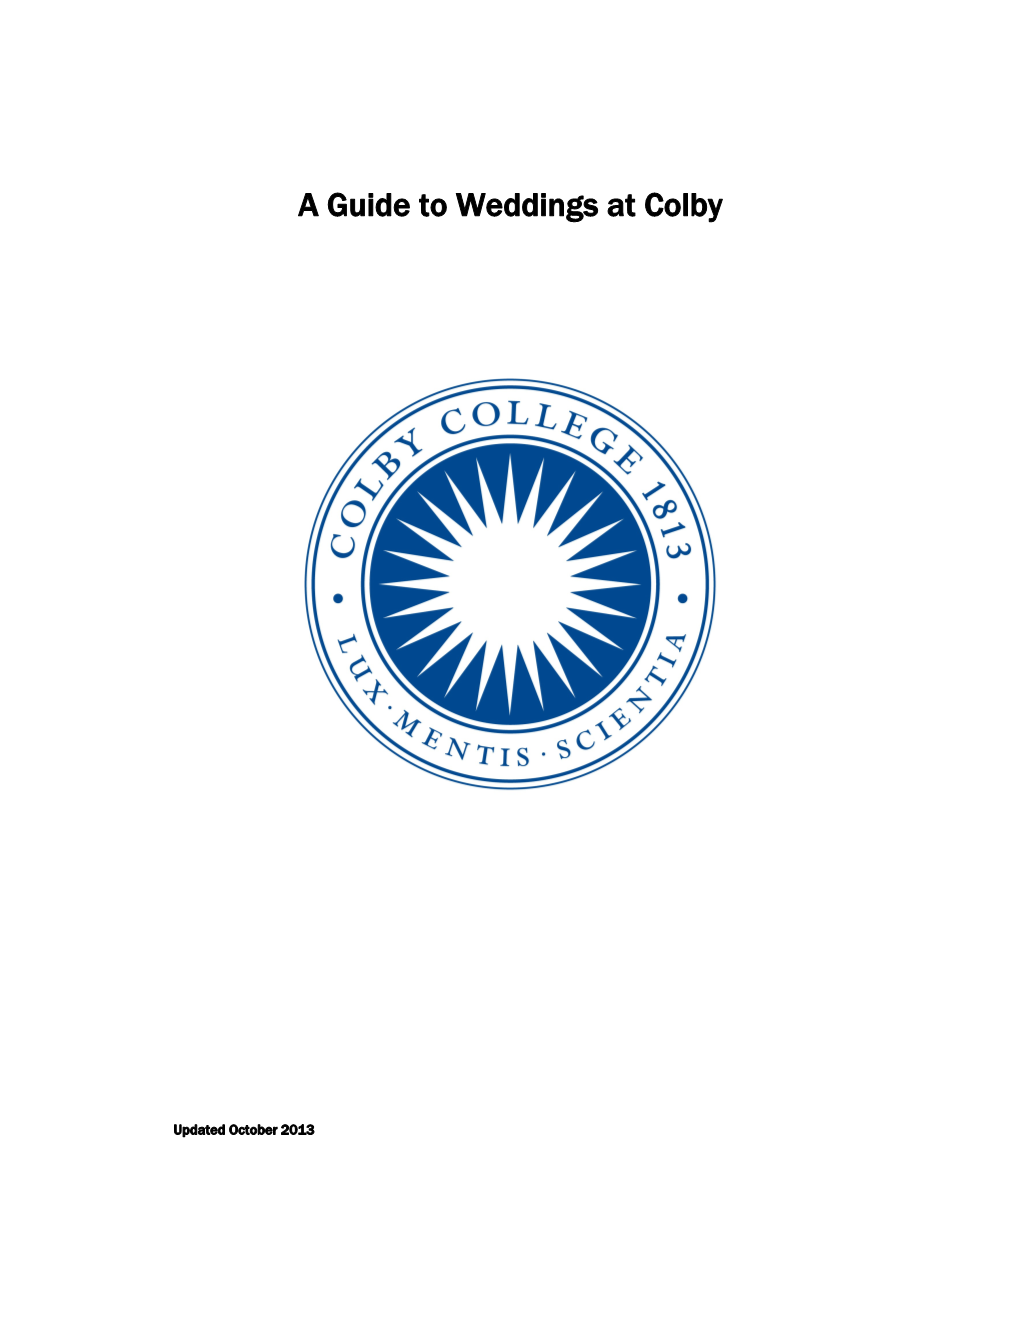 A Guide to Weddings at Colby